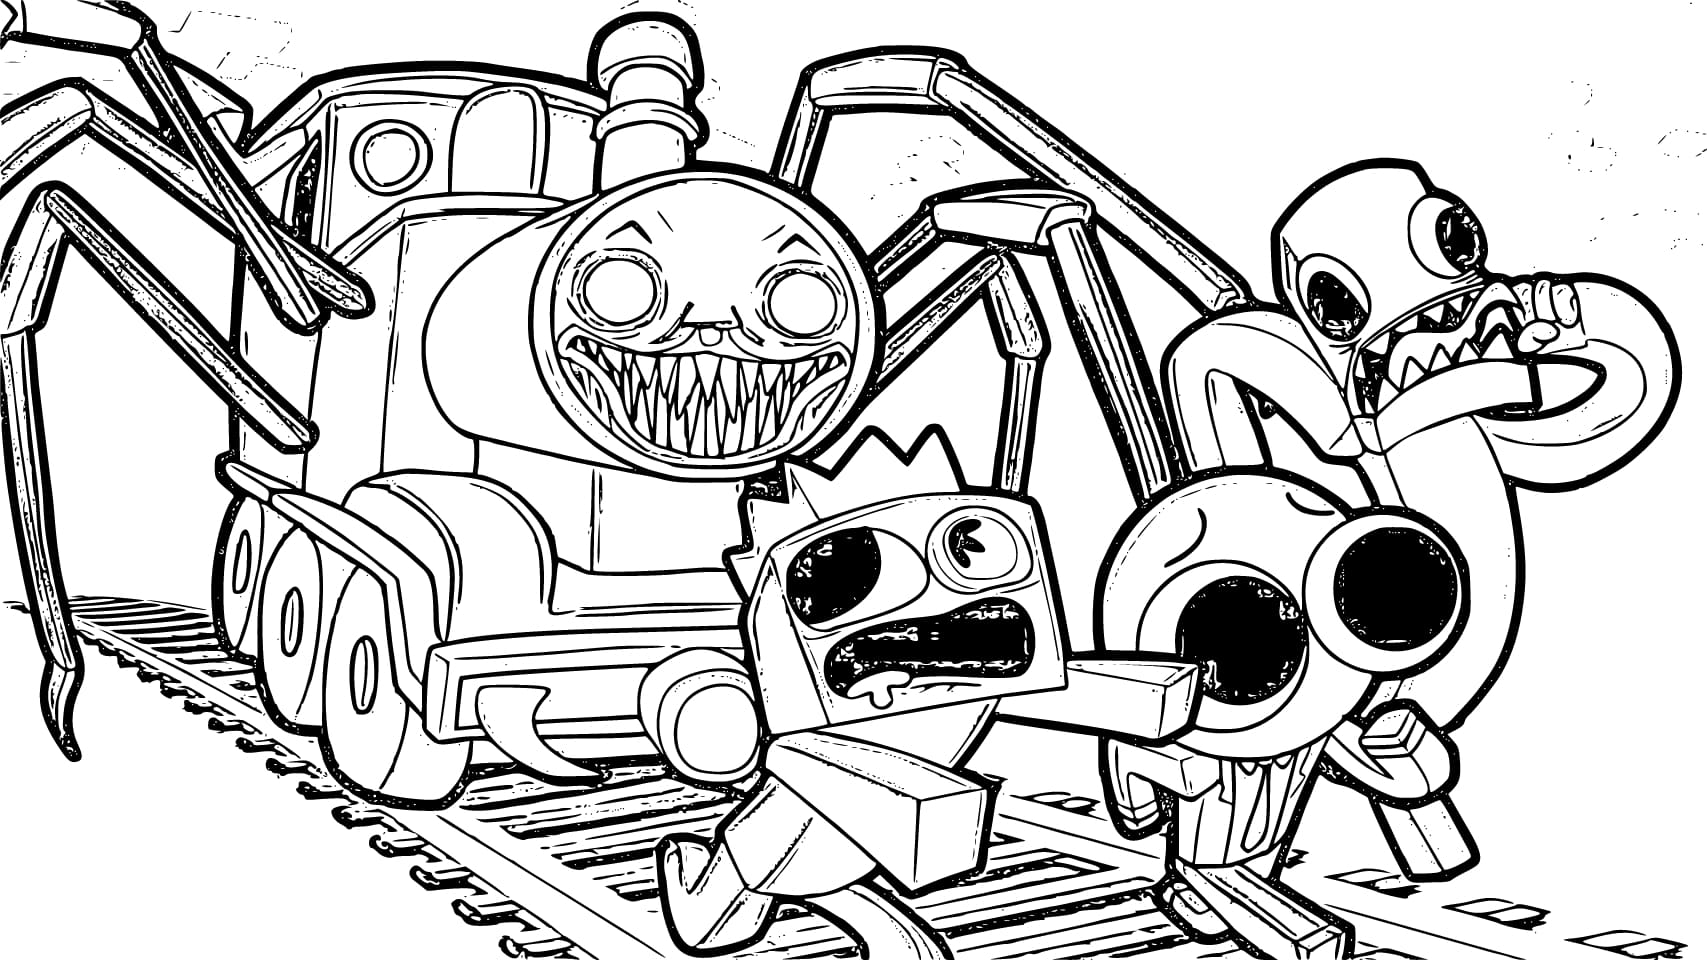 Choo-Choo Charles Coloring Pages  WONDER DAY — Coloring pages for children  and adults